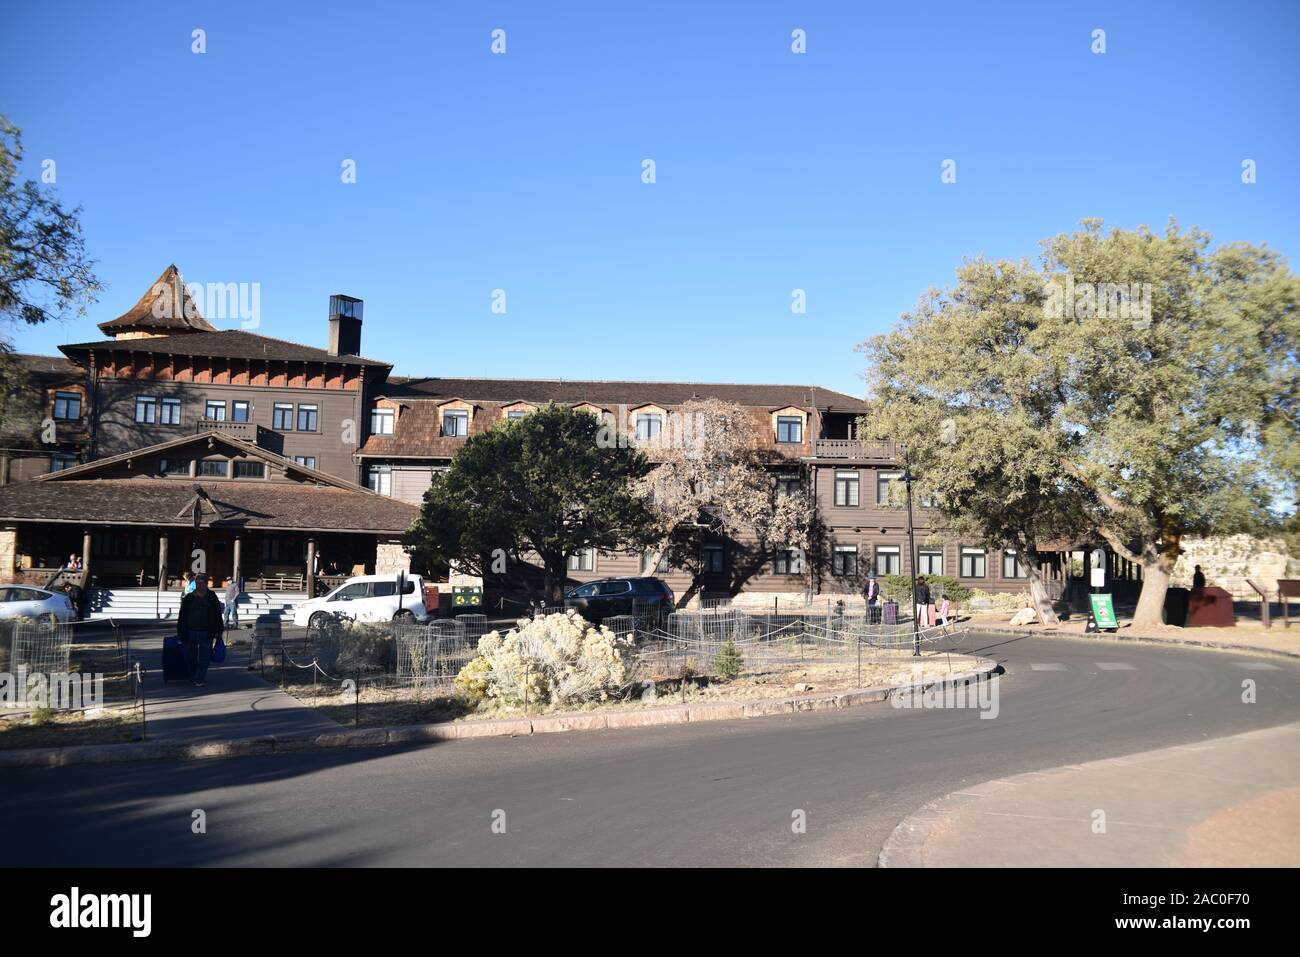 Grand Canyon, AZ., U.S.A. Nov. 1&4, 2019.  Grand Canyon National Park’s Grand Lady: El Tovar hotel decorated in Autumn leaves, pumpkins, and gourds Stock Photo